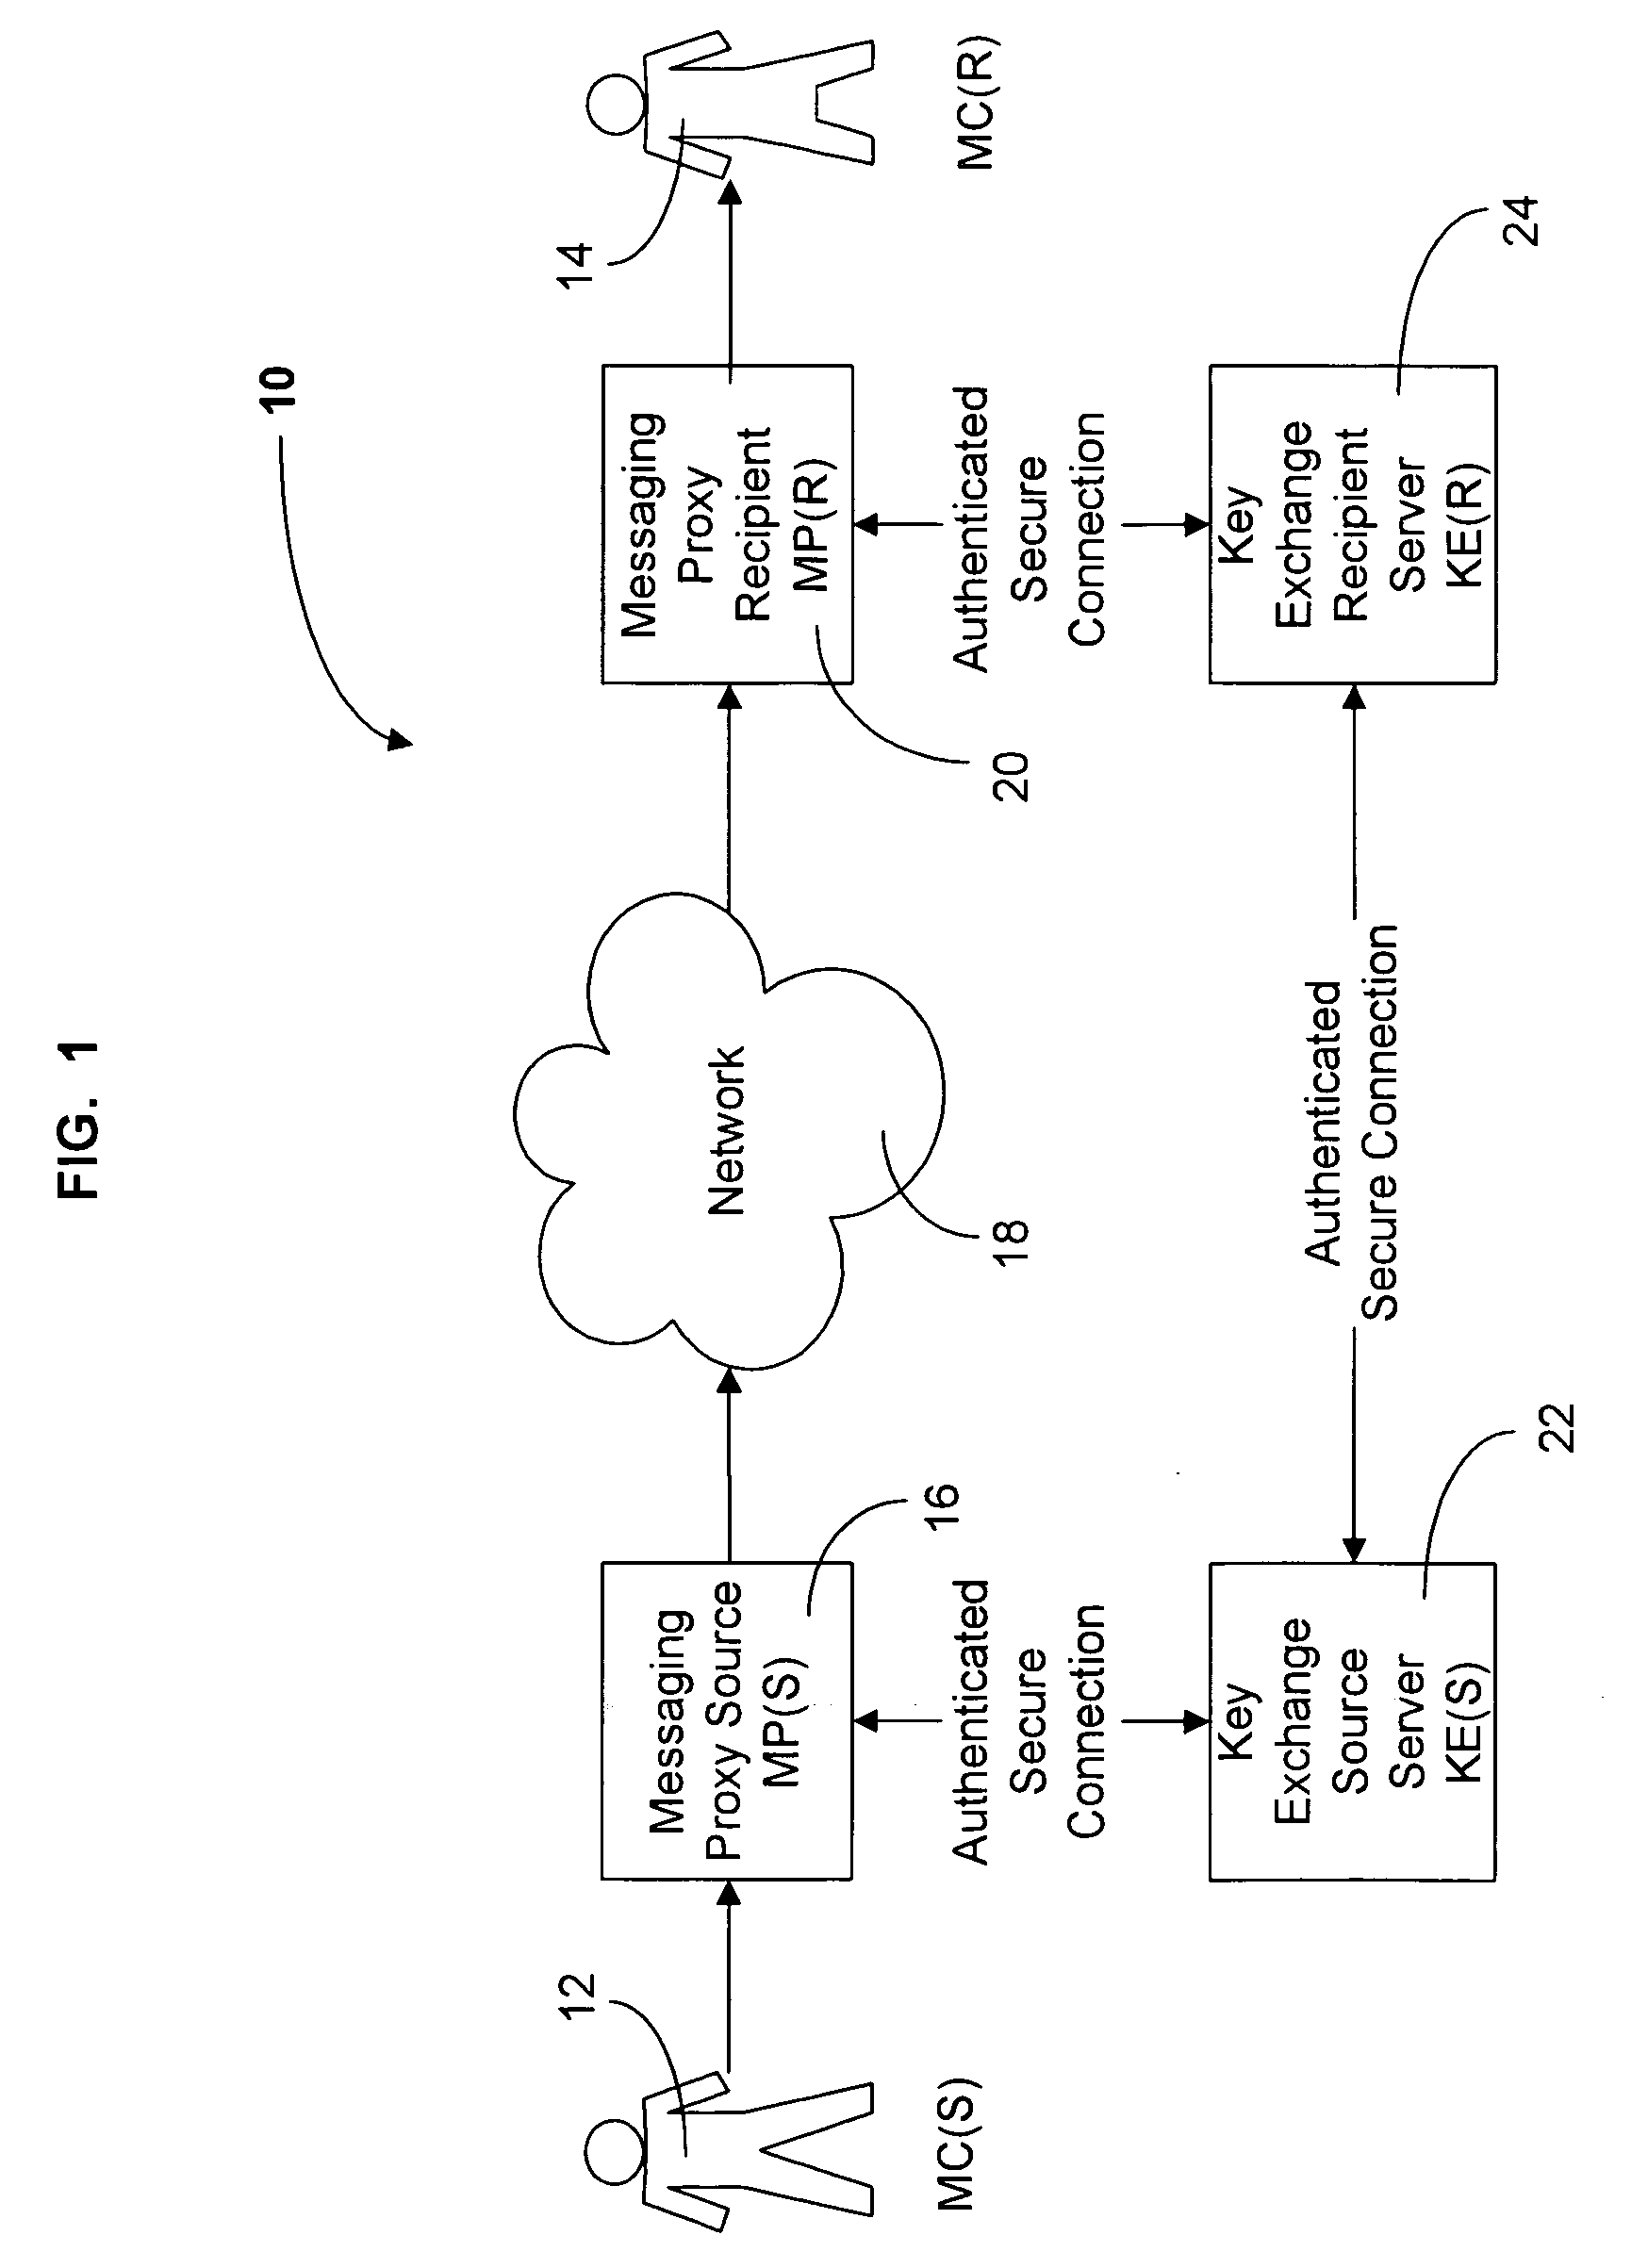 Method and system for sending secure messages over an unsecured network